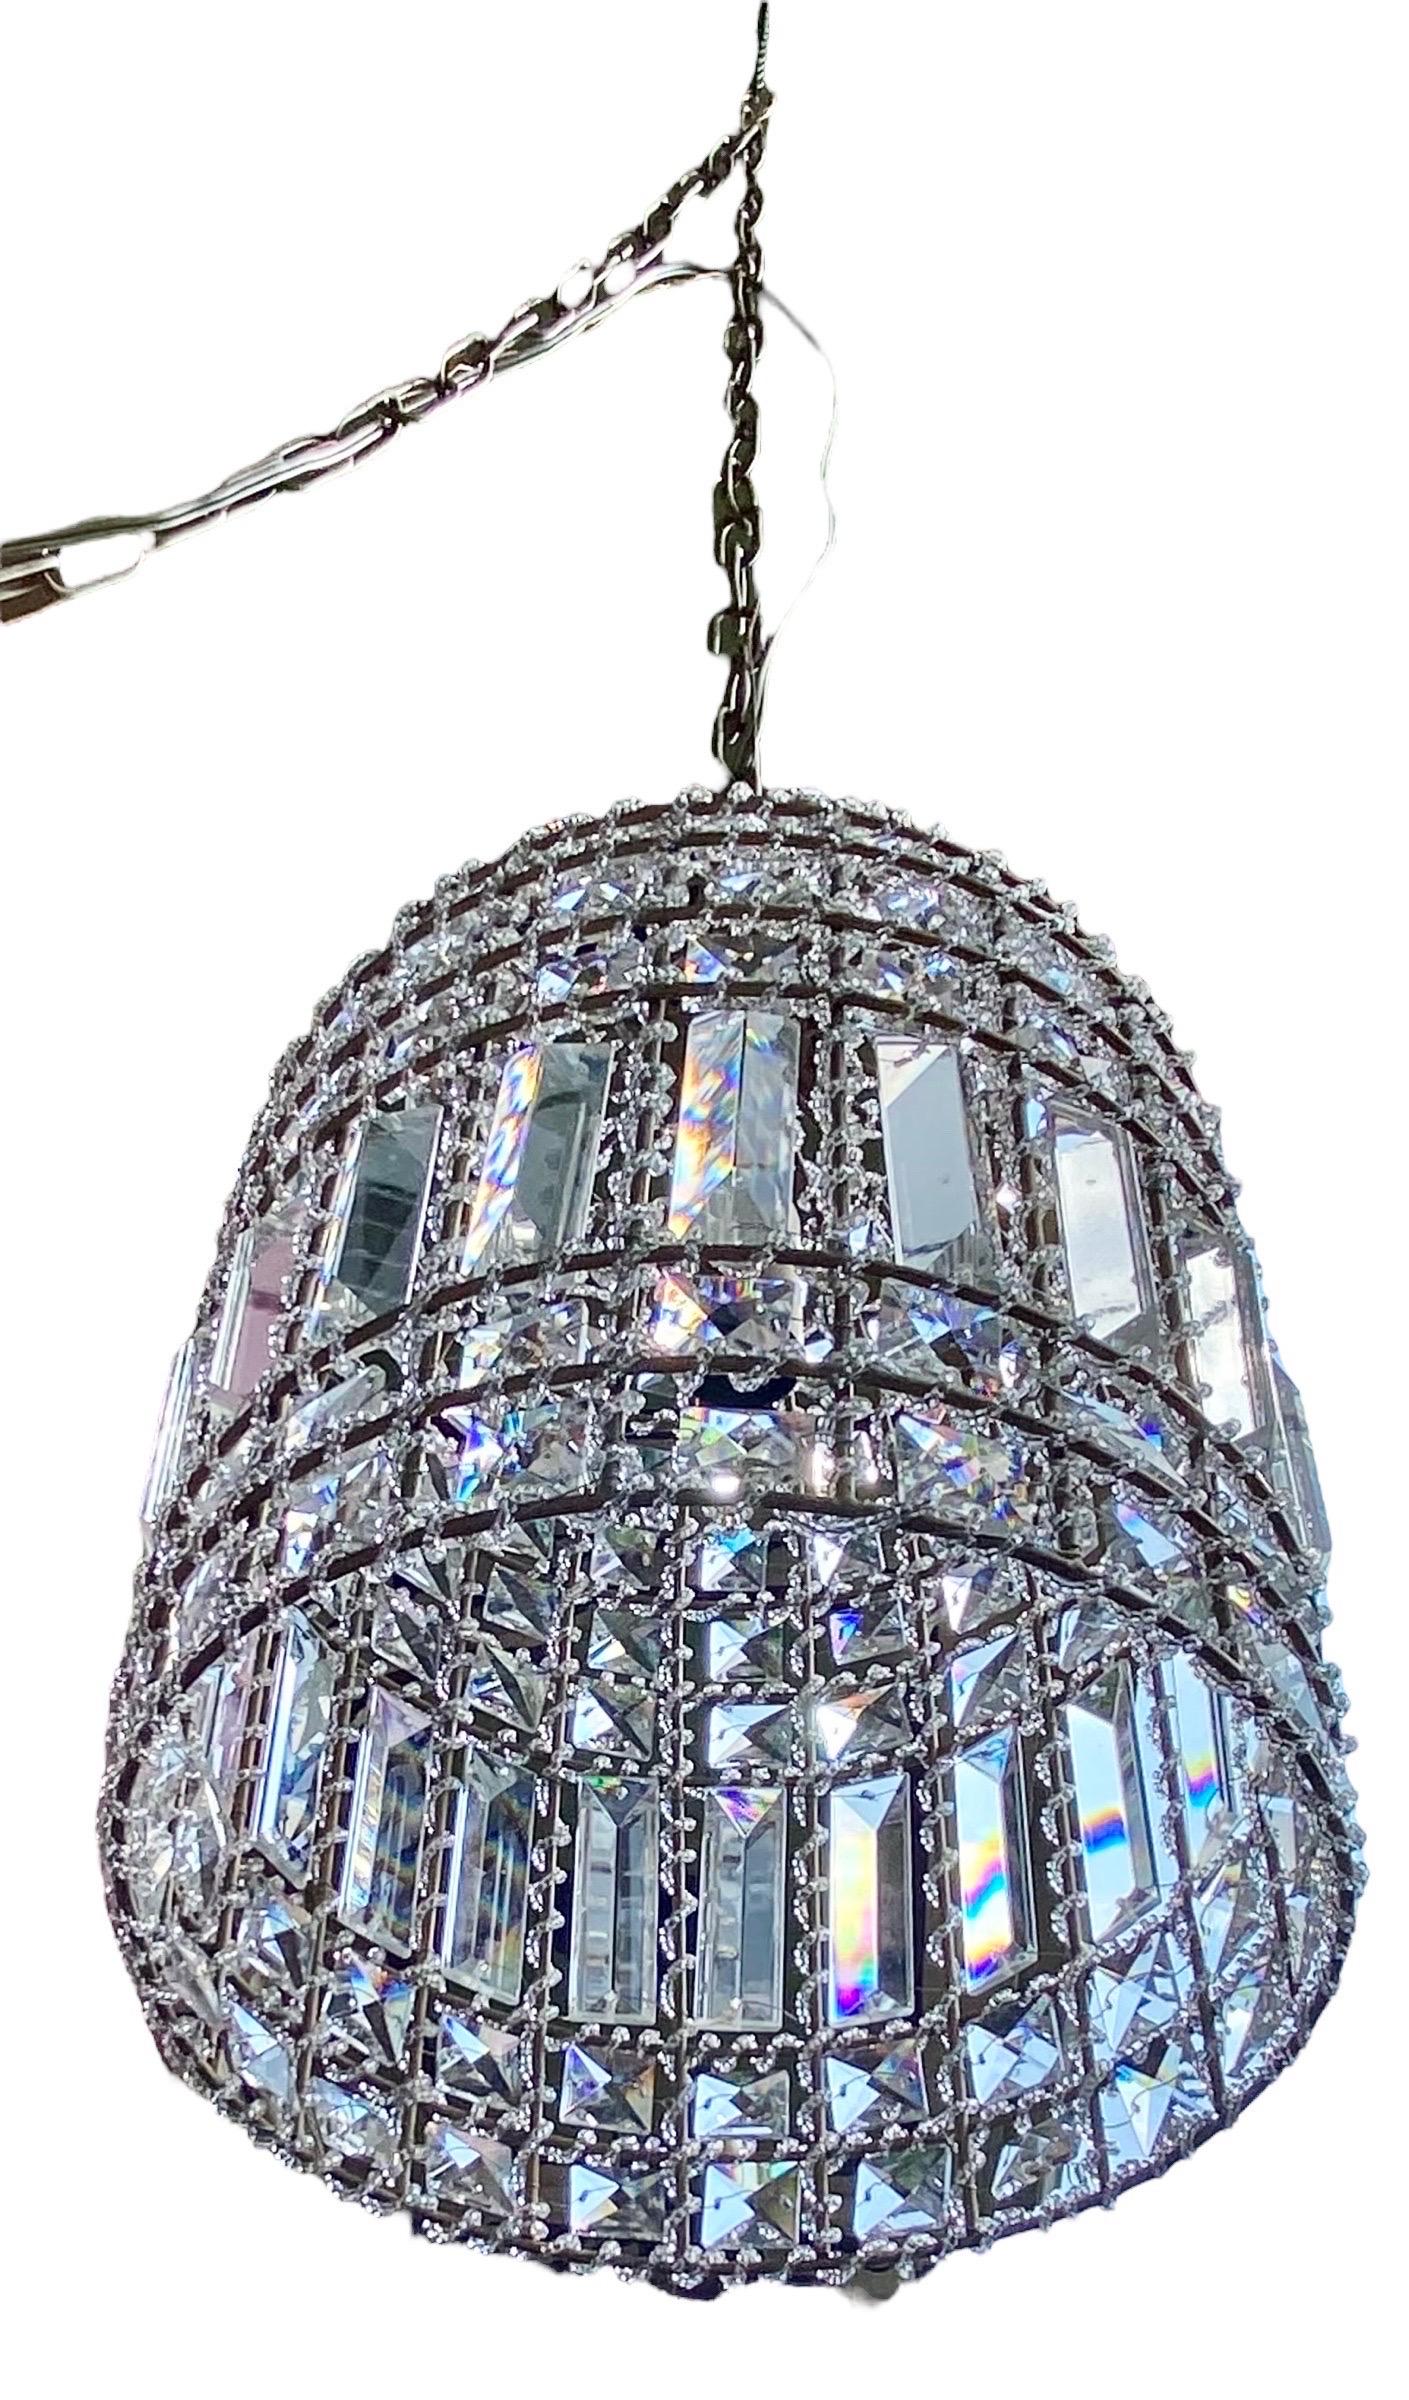 Simple yet elegant, this contemporary pendant chandelier will illuminate your space. It has a luminous dome metal frame with multifaceted crystals for an eye-catching look which requires a
40-watt candelabra style bulb for an enhanced and